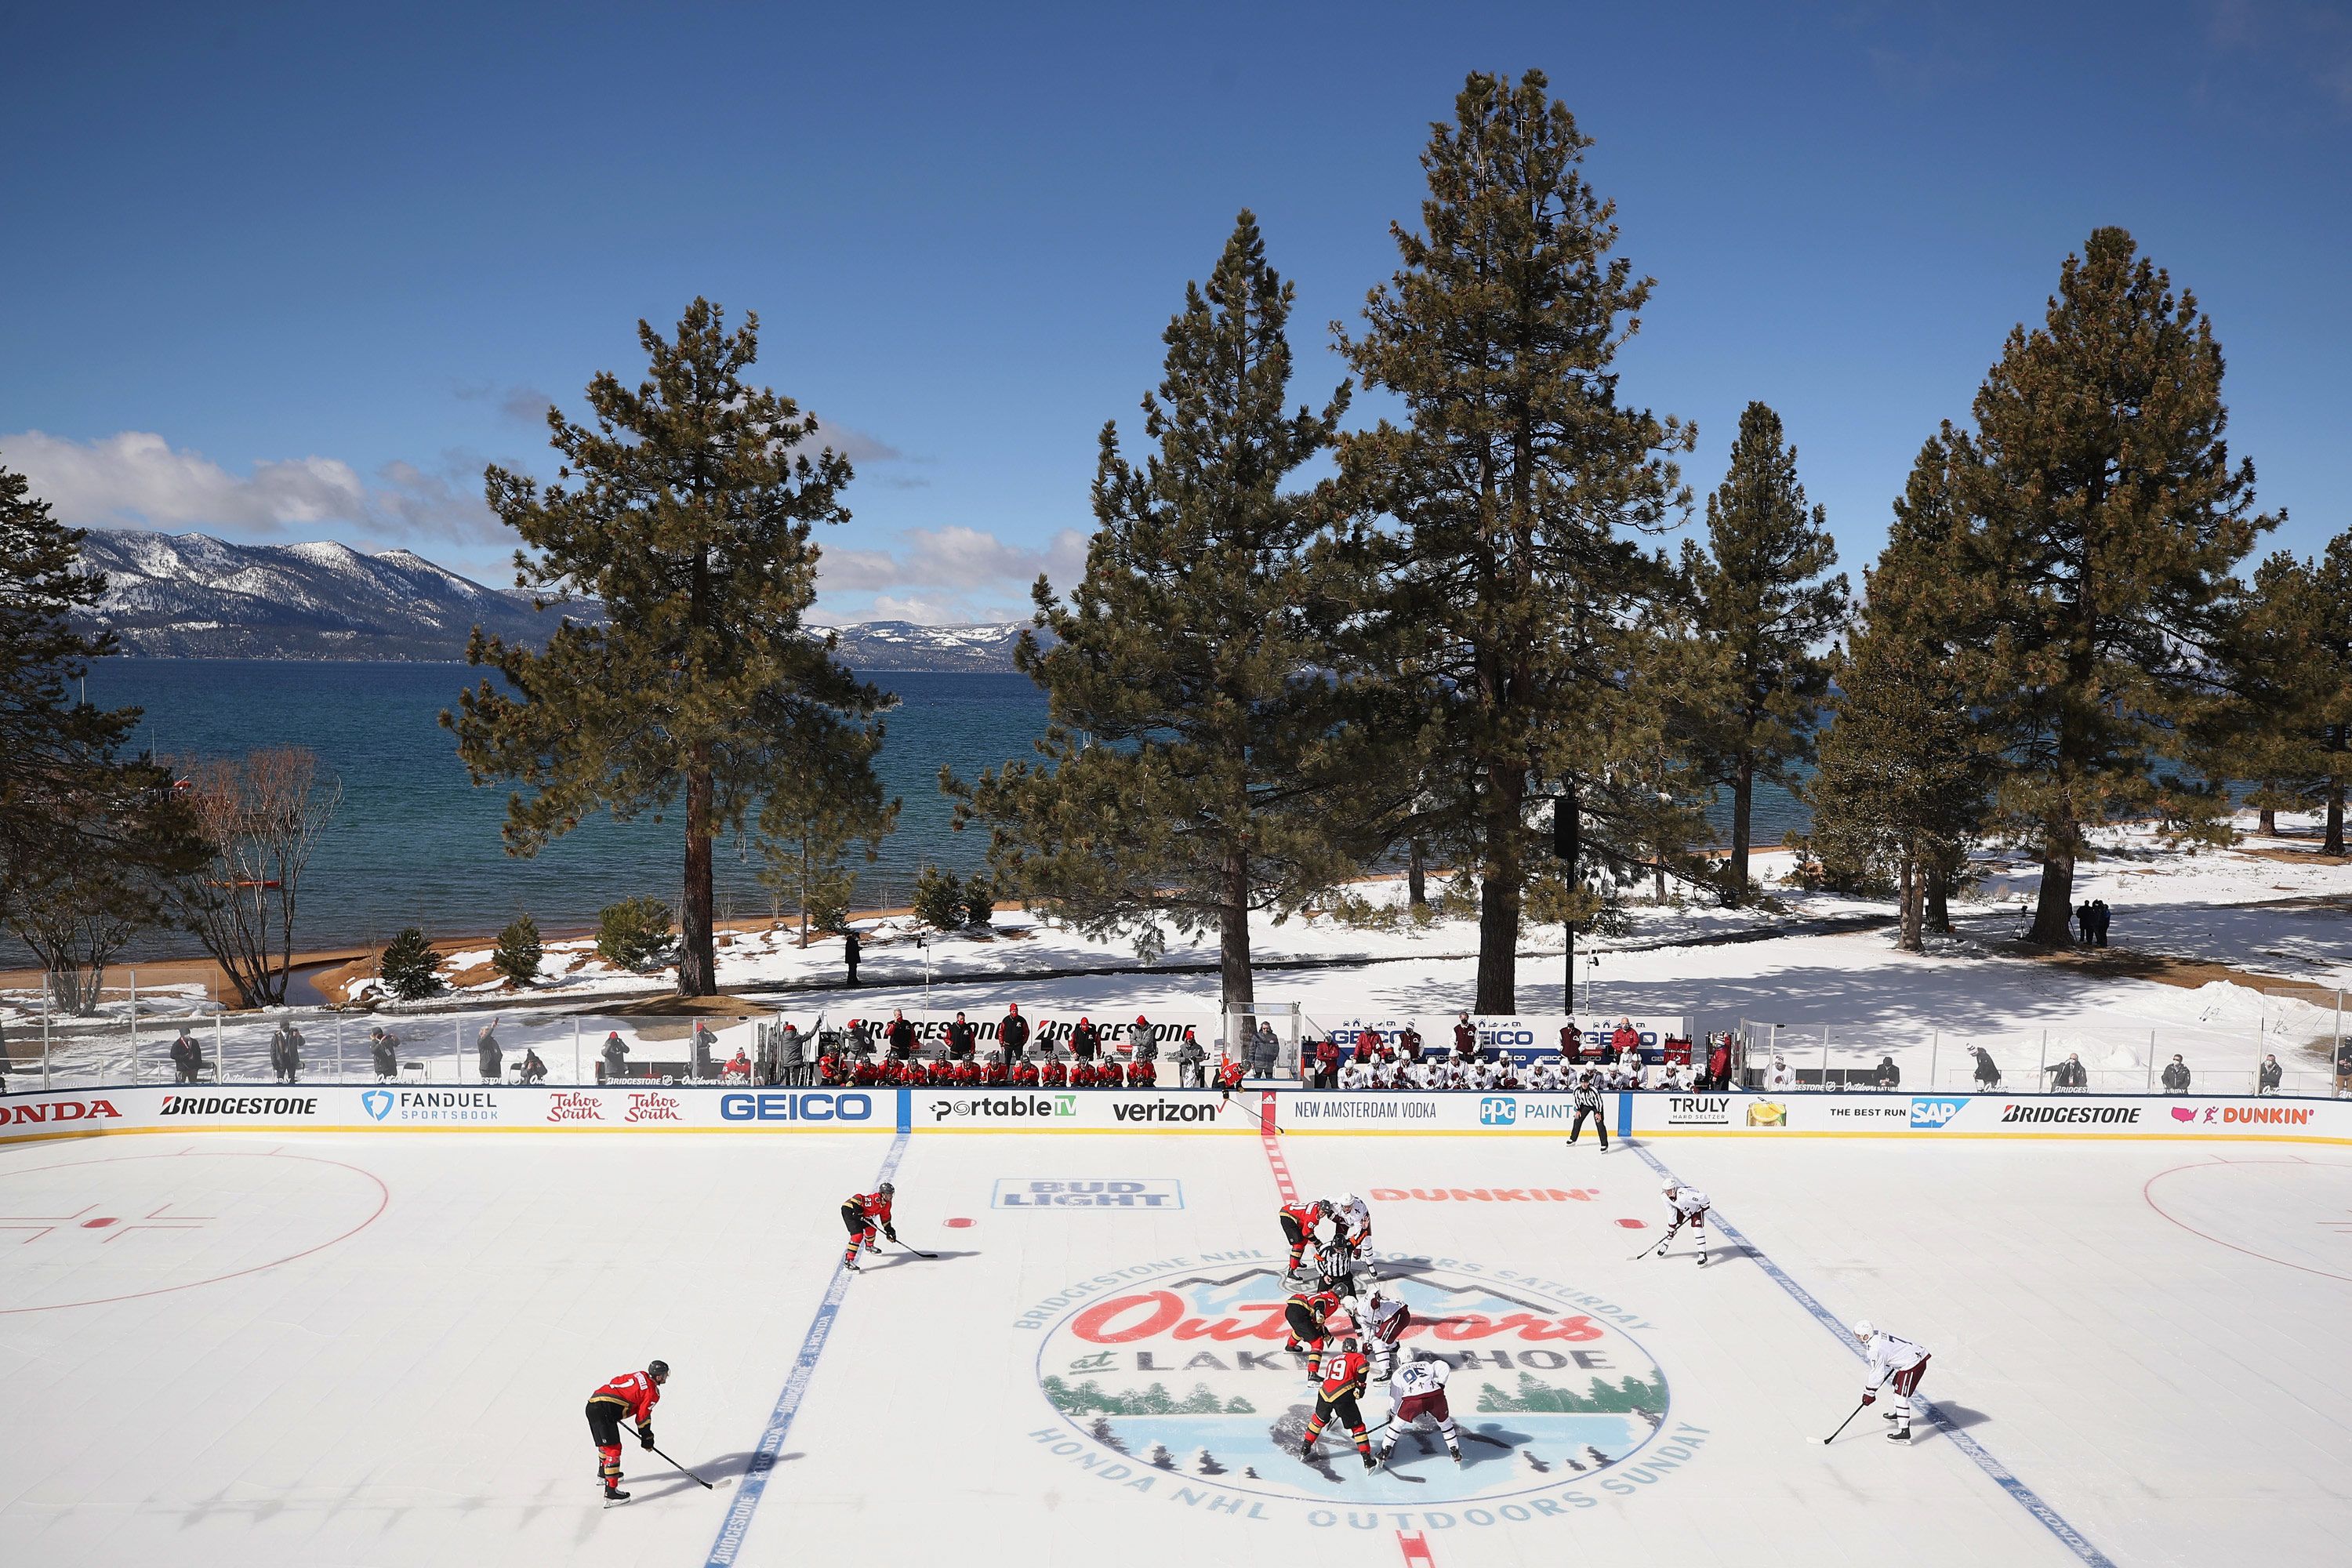 Picturesque golf course by lake stages Winter Classic